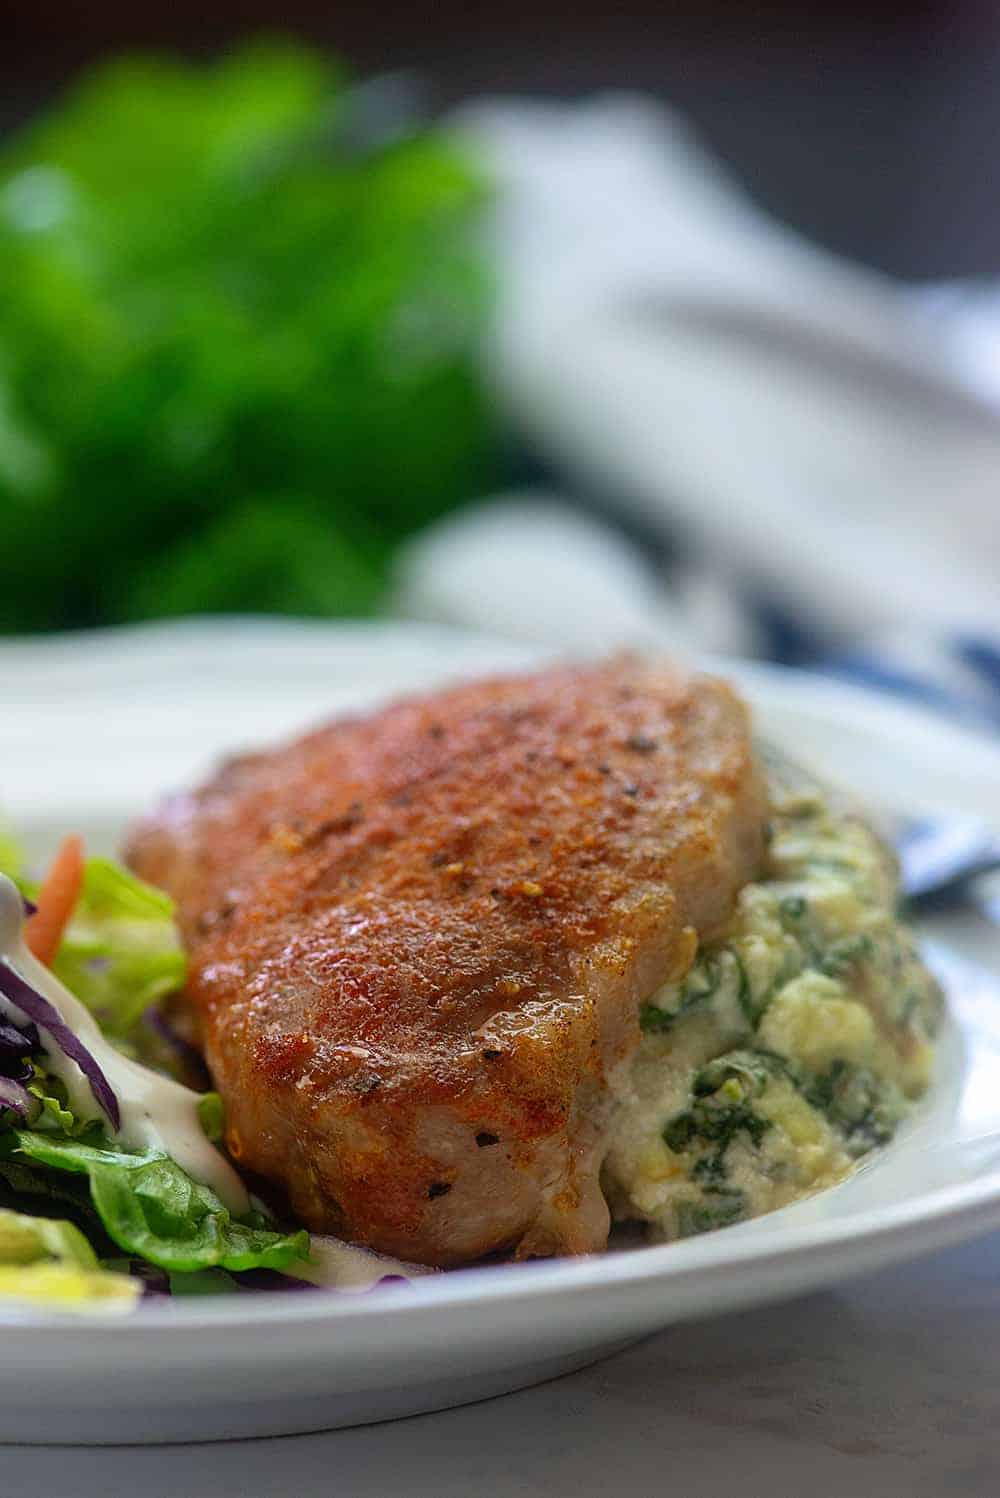 Spinach stuffed pork chop and a salad on white plate.